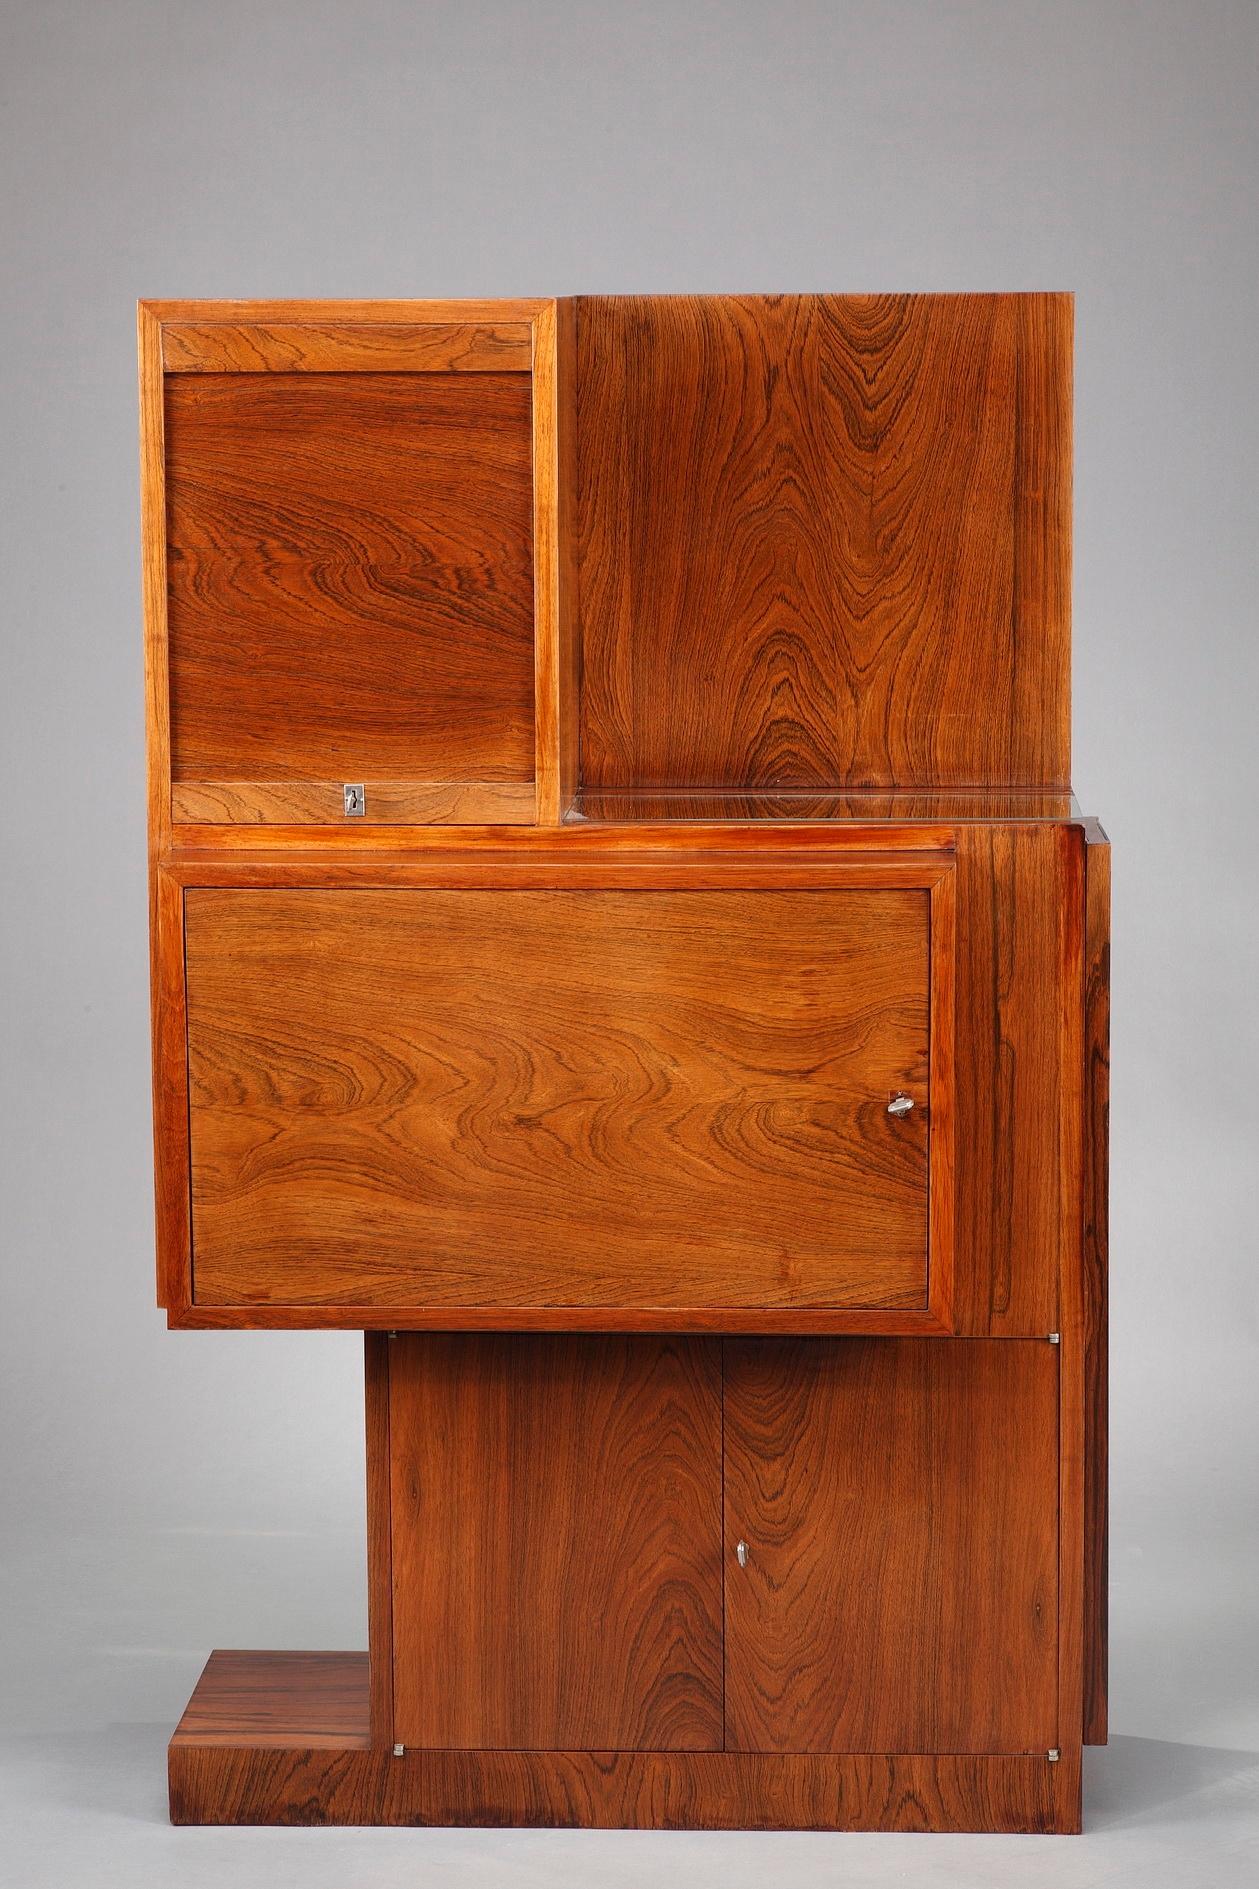 Asymmetrical Art Deco bar and drop-front desk crafted of rosewood veneer in the taste of André Sornay (French, 1902-2000). Both have rectangular containers and display geometric lines in the purest Art Deco style. The bar has two flap doors in the